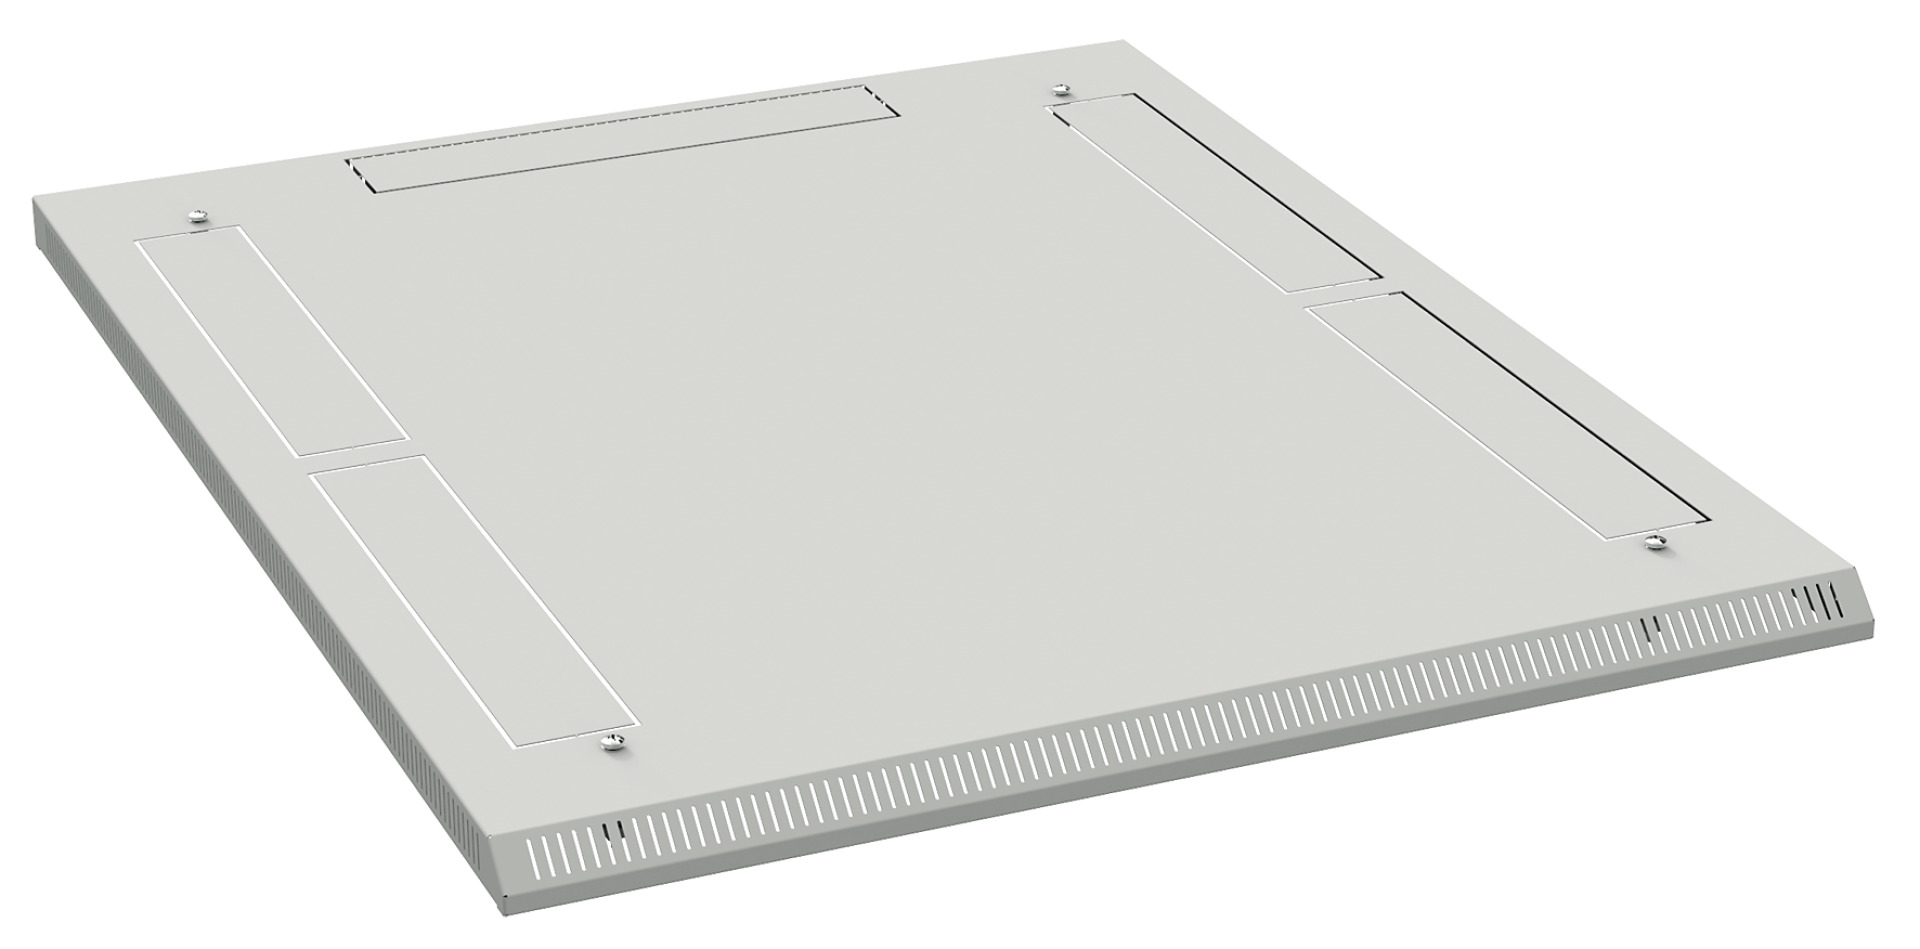 Additional Roof H=40 mm, 600x1200 mm, RAL9005, for Cabinet Series PRO